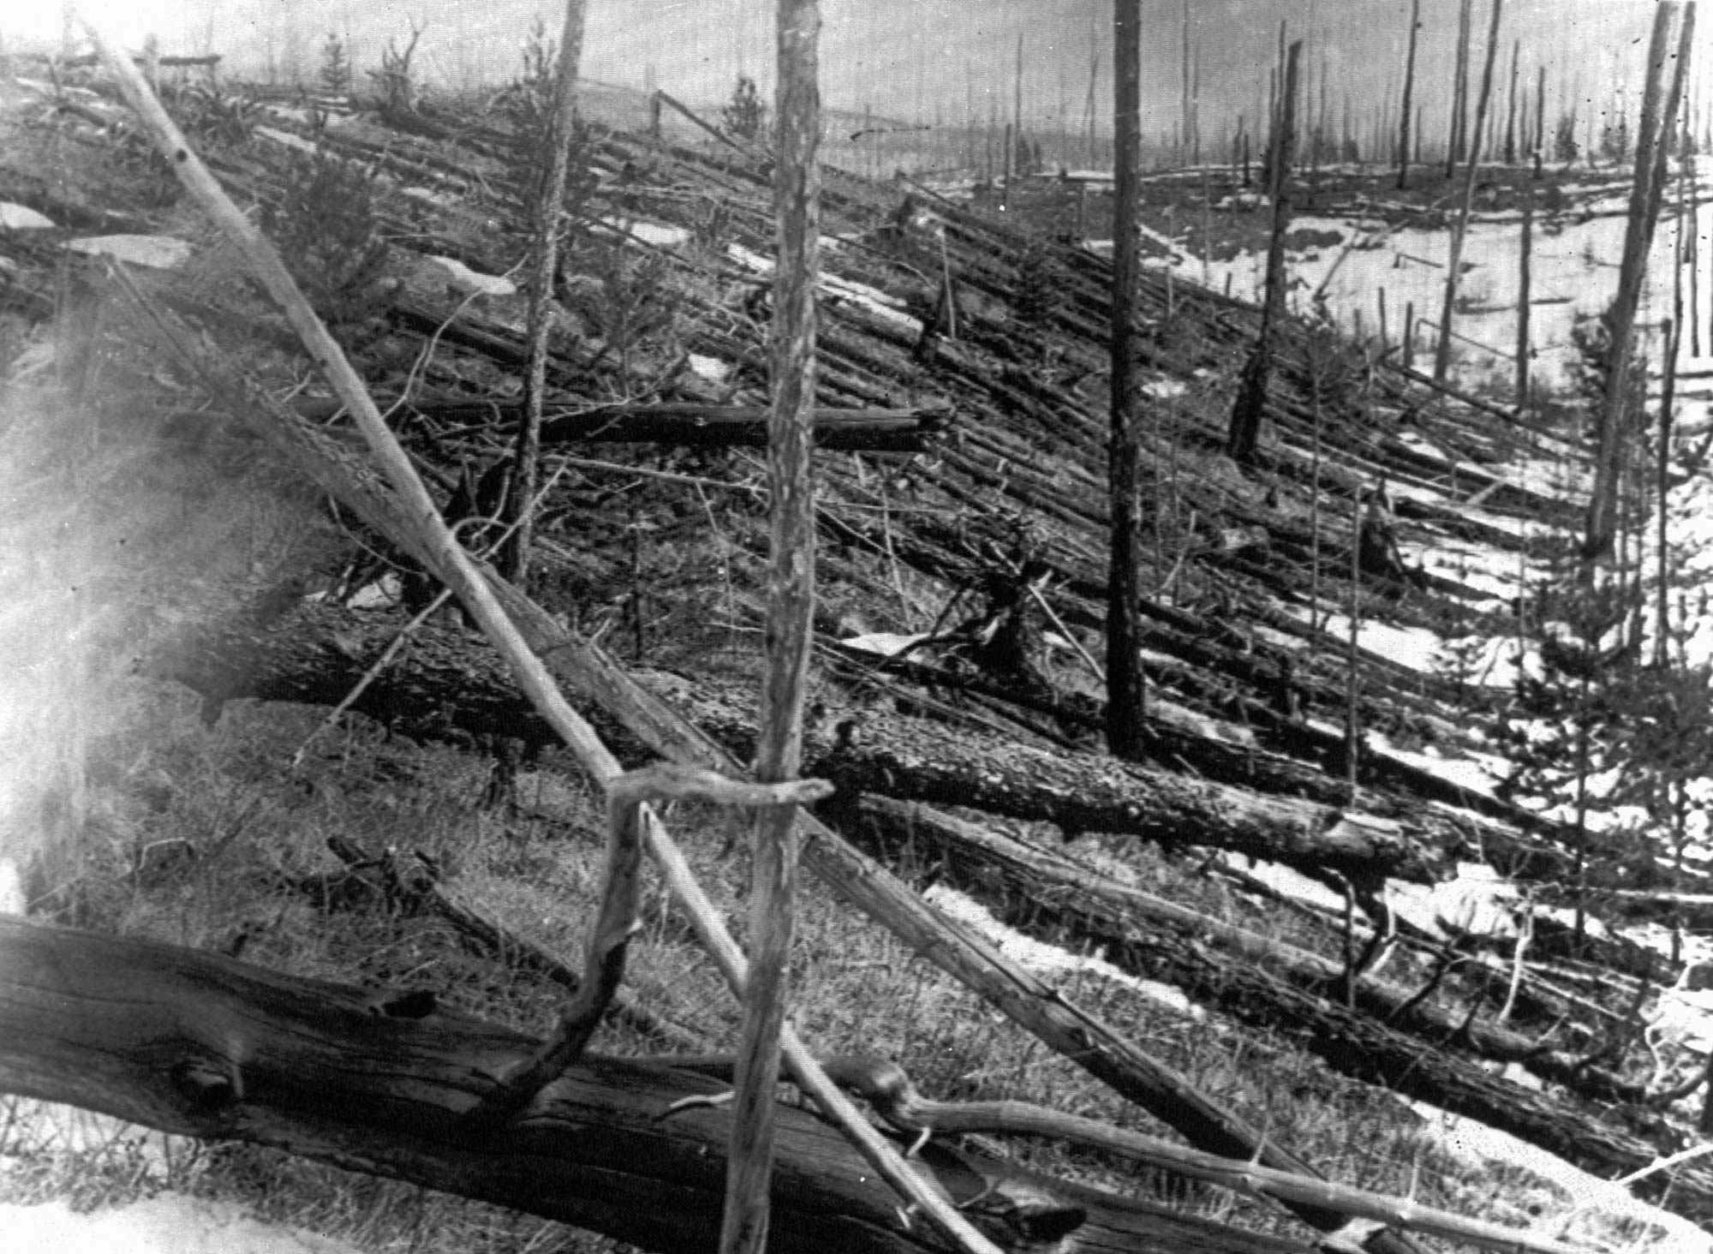 FILE - In this 1953 file photo, trees lie strewn across the Siberian countryside 45 years after a meteorite struck the Earth near Tunguska, Russia. The 1908 explosion is generally estimated to have been about 10 megatons; it leveled some 80 million trees for miles near the impact site. The meteor that streaked across the Russian sky Friday, Feb. 15, 2013, is estimated to be about 10 tons. It exploded with the power of an atomic bomb over the Ural Mountains, about 5,000 kilometers (3,000 miles) west of Tunguska. (AP Photo, File)